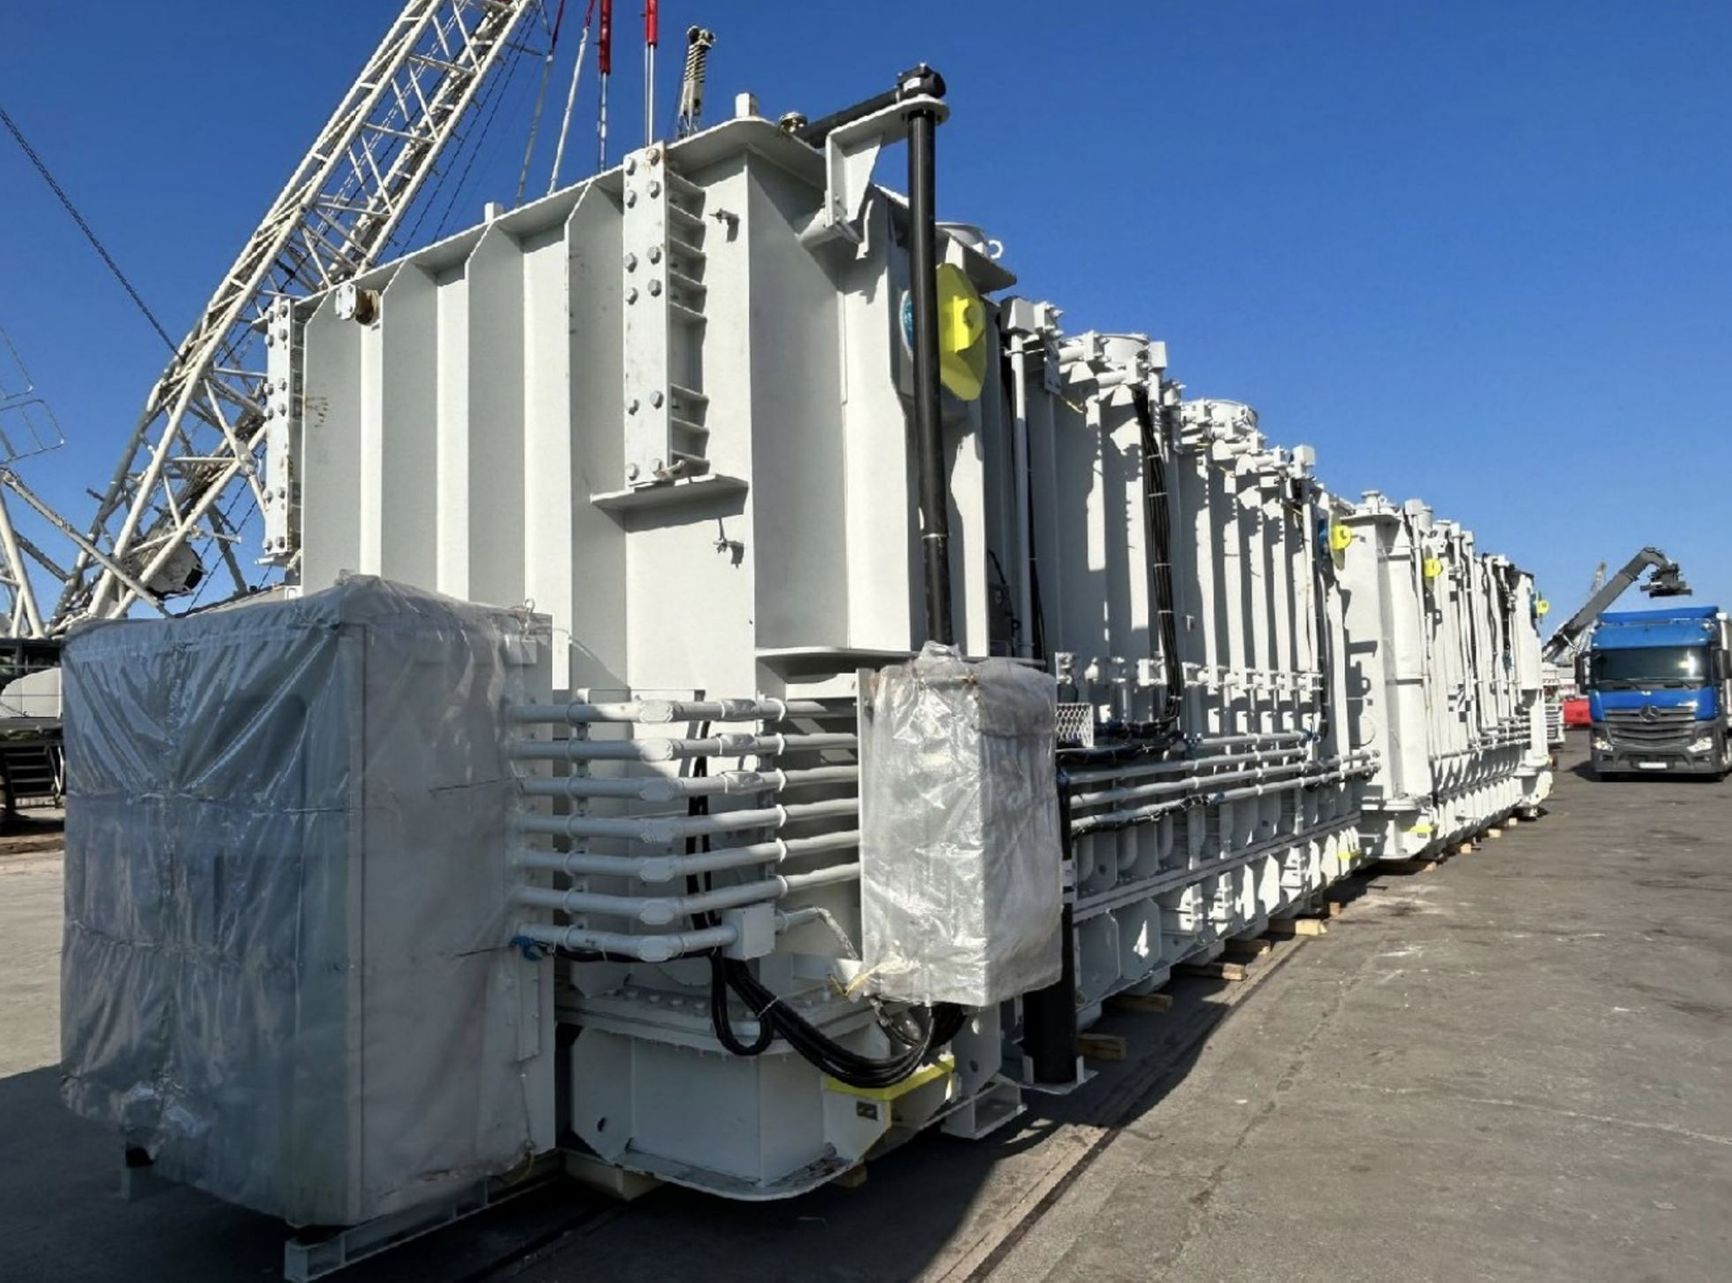 The autotransformers purchased by Ukraine with the support of allies